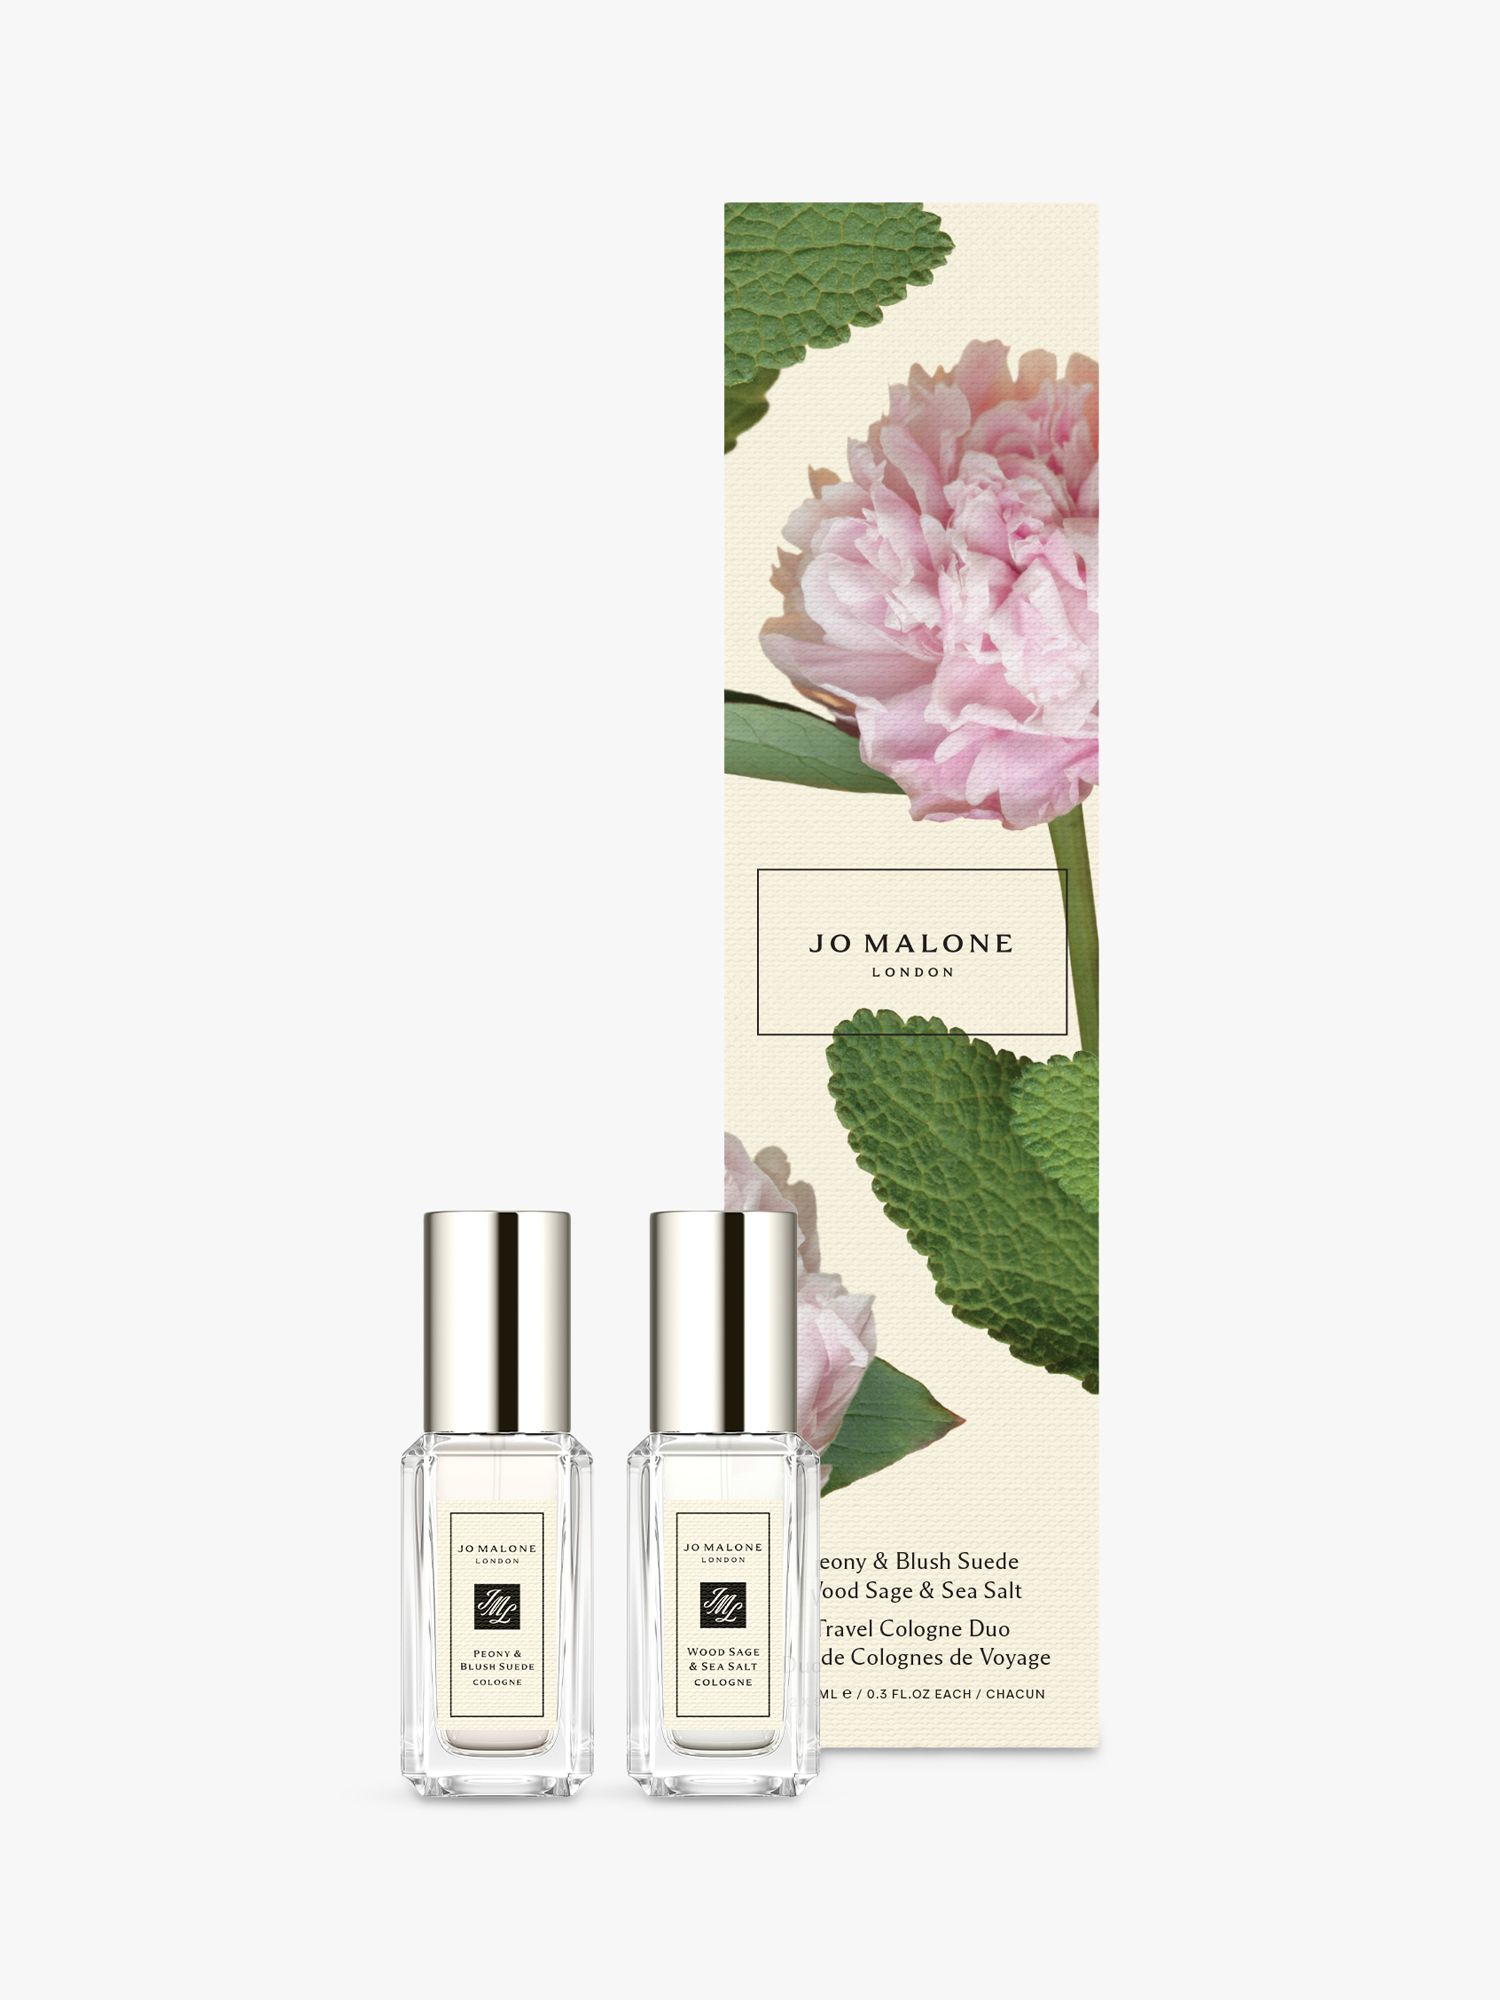 Jo Malone London Peony & Blush Suede and Wood Sage & Sea Salt Cologne Duo Fragrance Gift Set 2